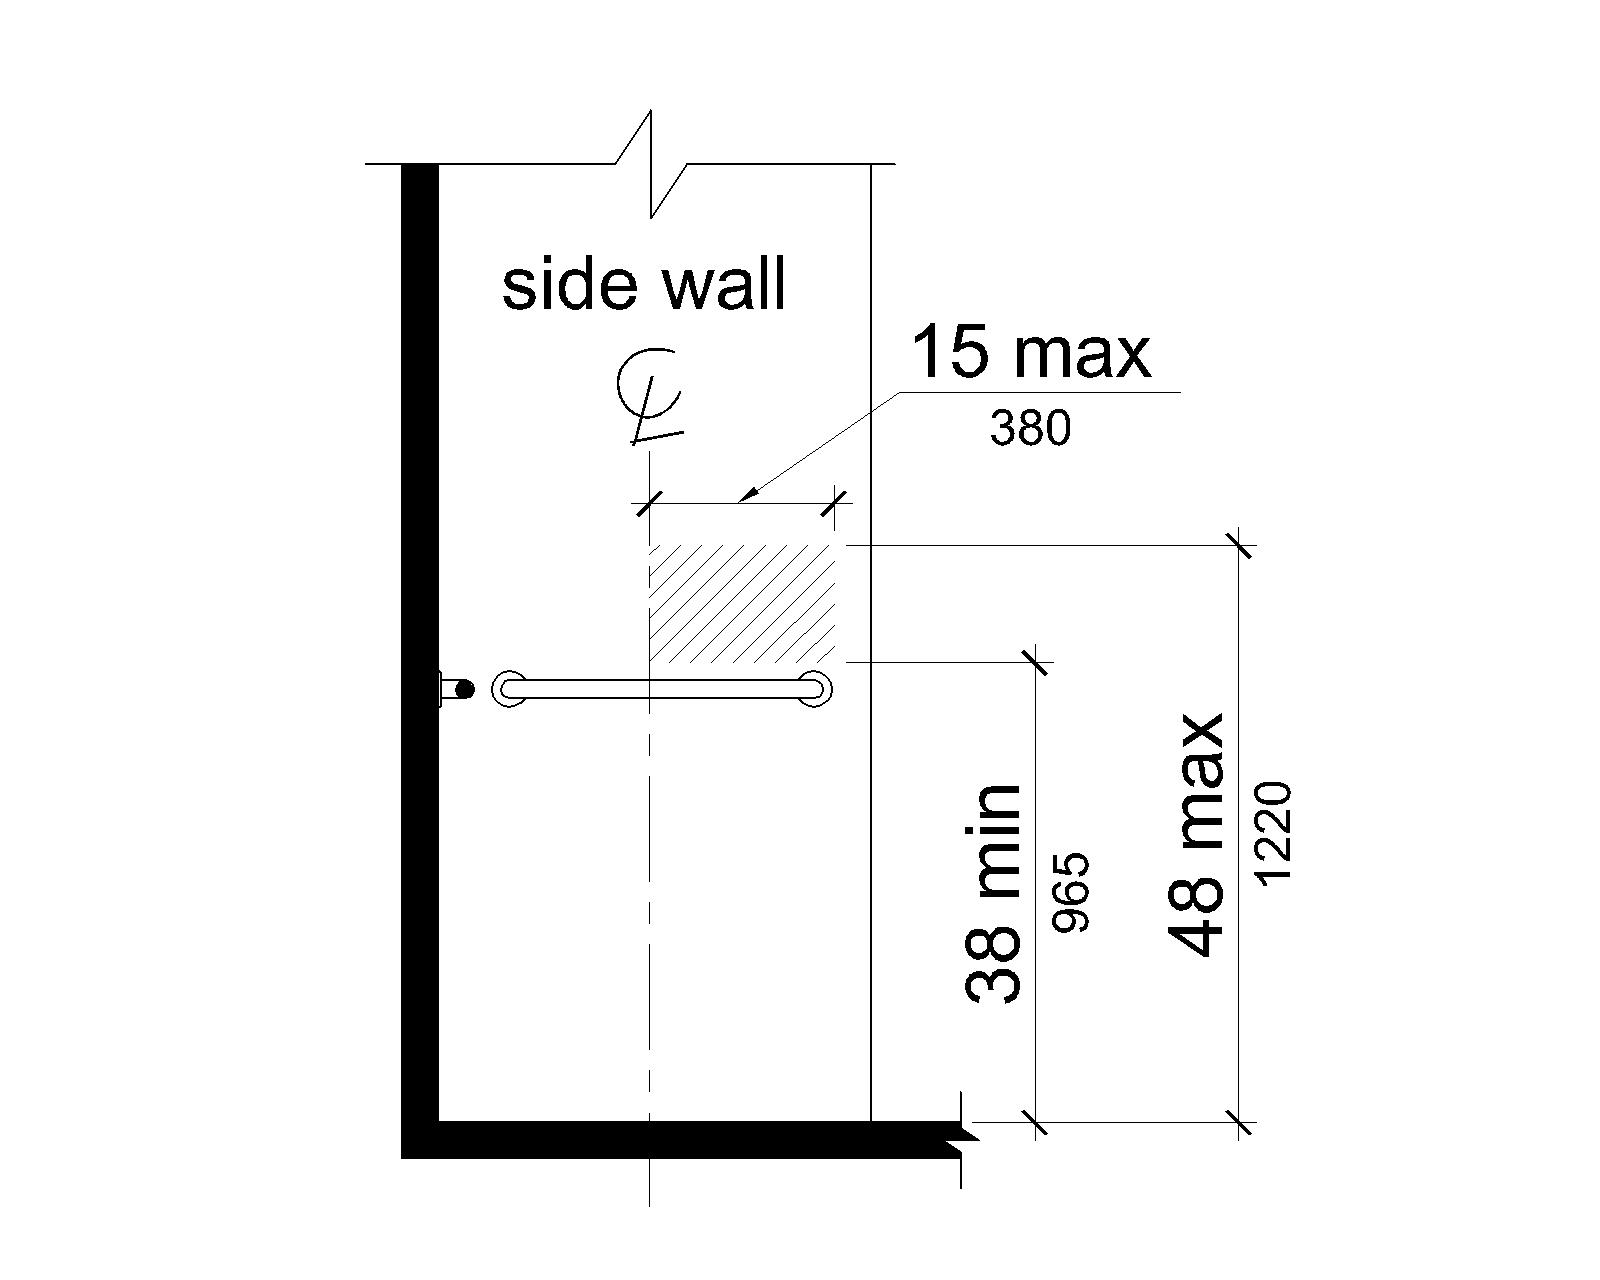 The area for controls, faucets and shower spray units is located 38 inches (965 mm) minimum to 48 inches (1220 mm) maximum above the shower deck surface on the control wall 15 inches (380 mm) maximum from the centerline of the seat, toward the shower opening.